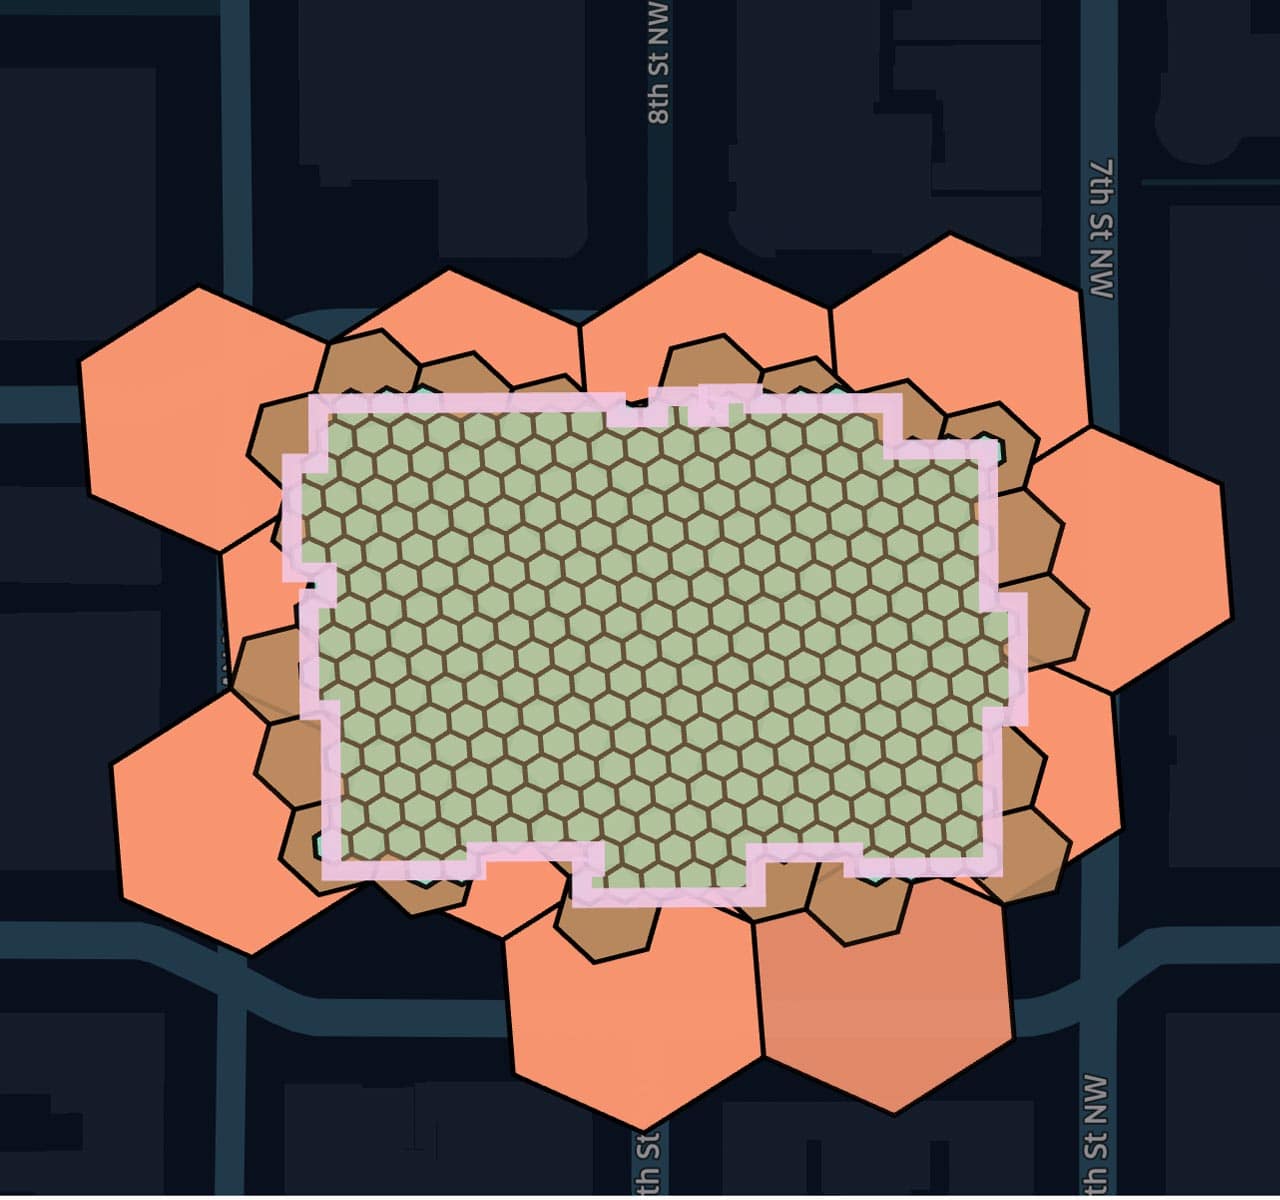 Zoom in at National Portrait Gallery in Washington, DC, displaying overlapping hexagons at resolutions 11, 12, and 13